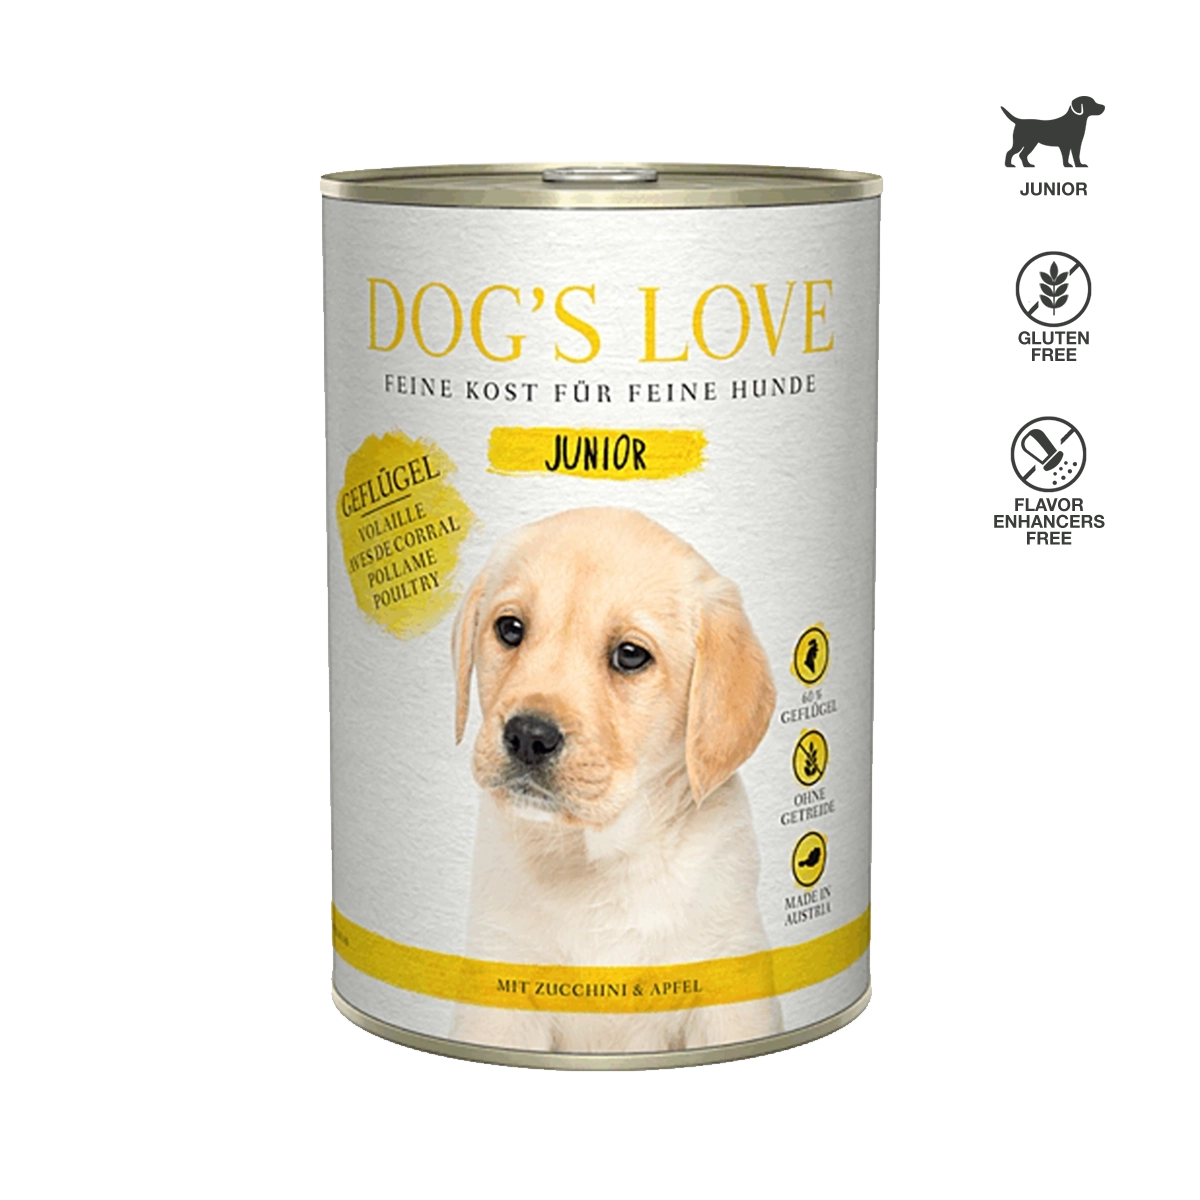 DOG'S LOVE | JUNIOR Poultry